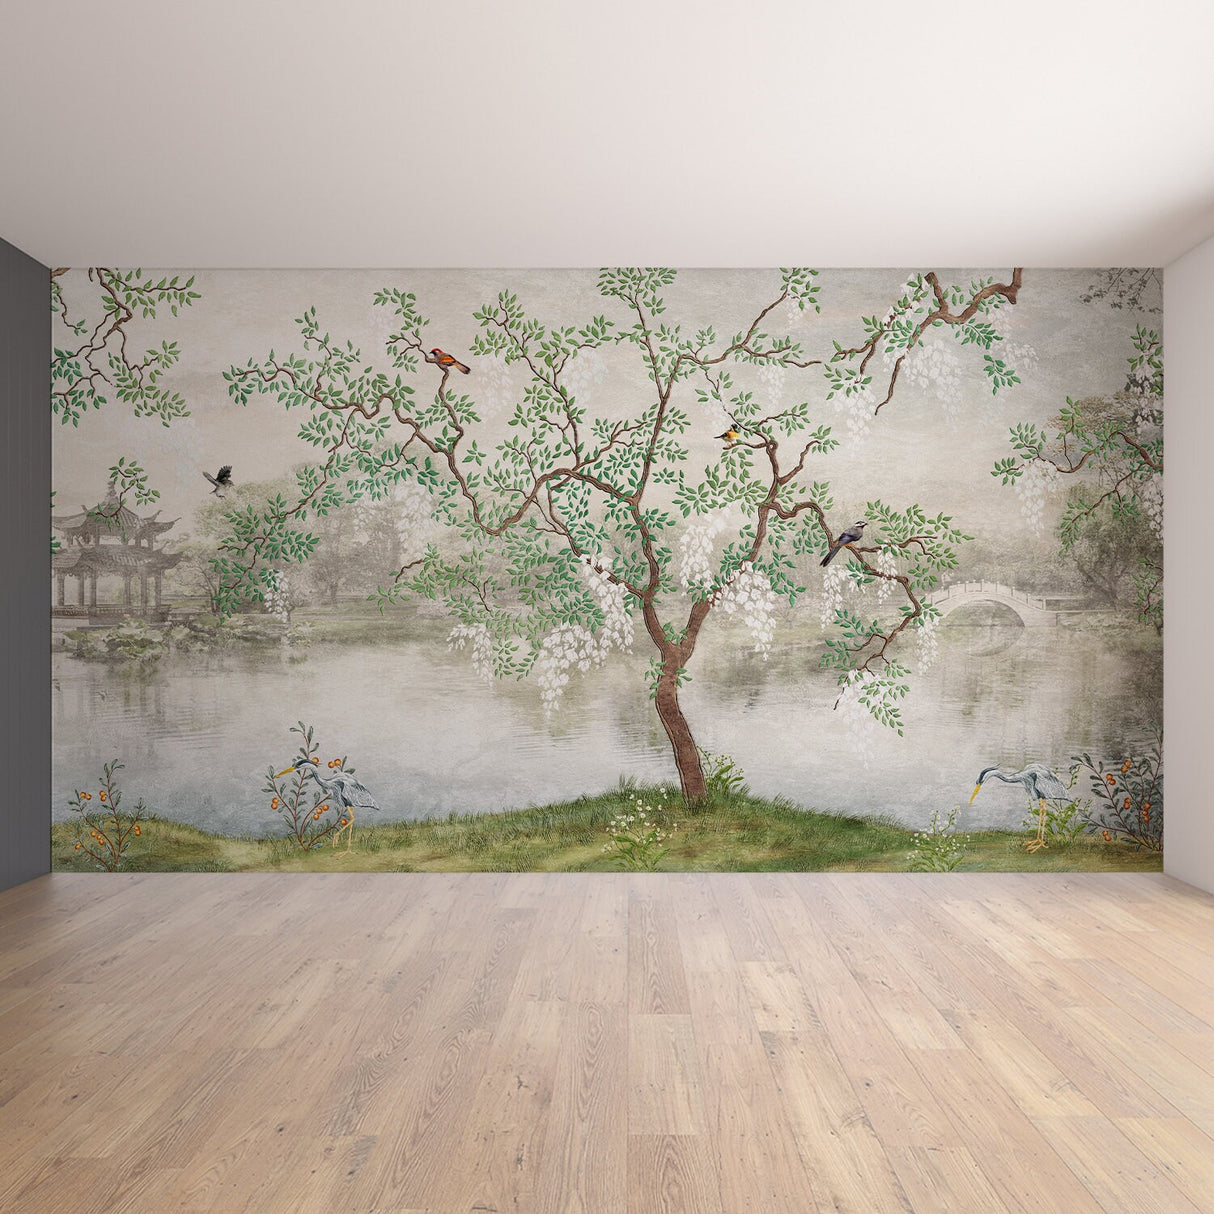 Toile Bedroom Chinoiserie Wallpaper Garden Vintage Sticker - Grey Adhesive Wall Paper Print Home Decor